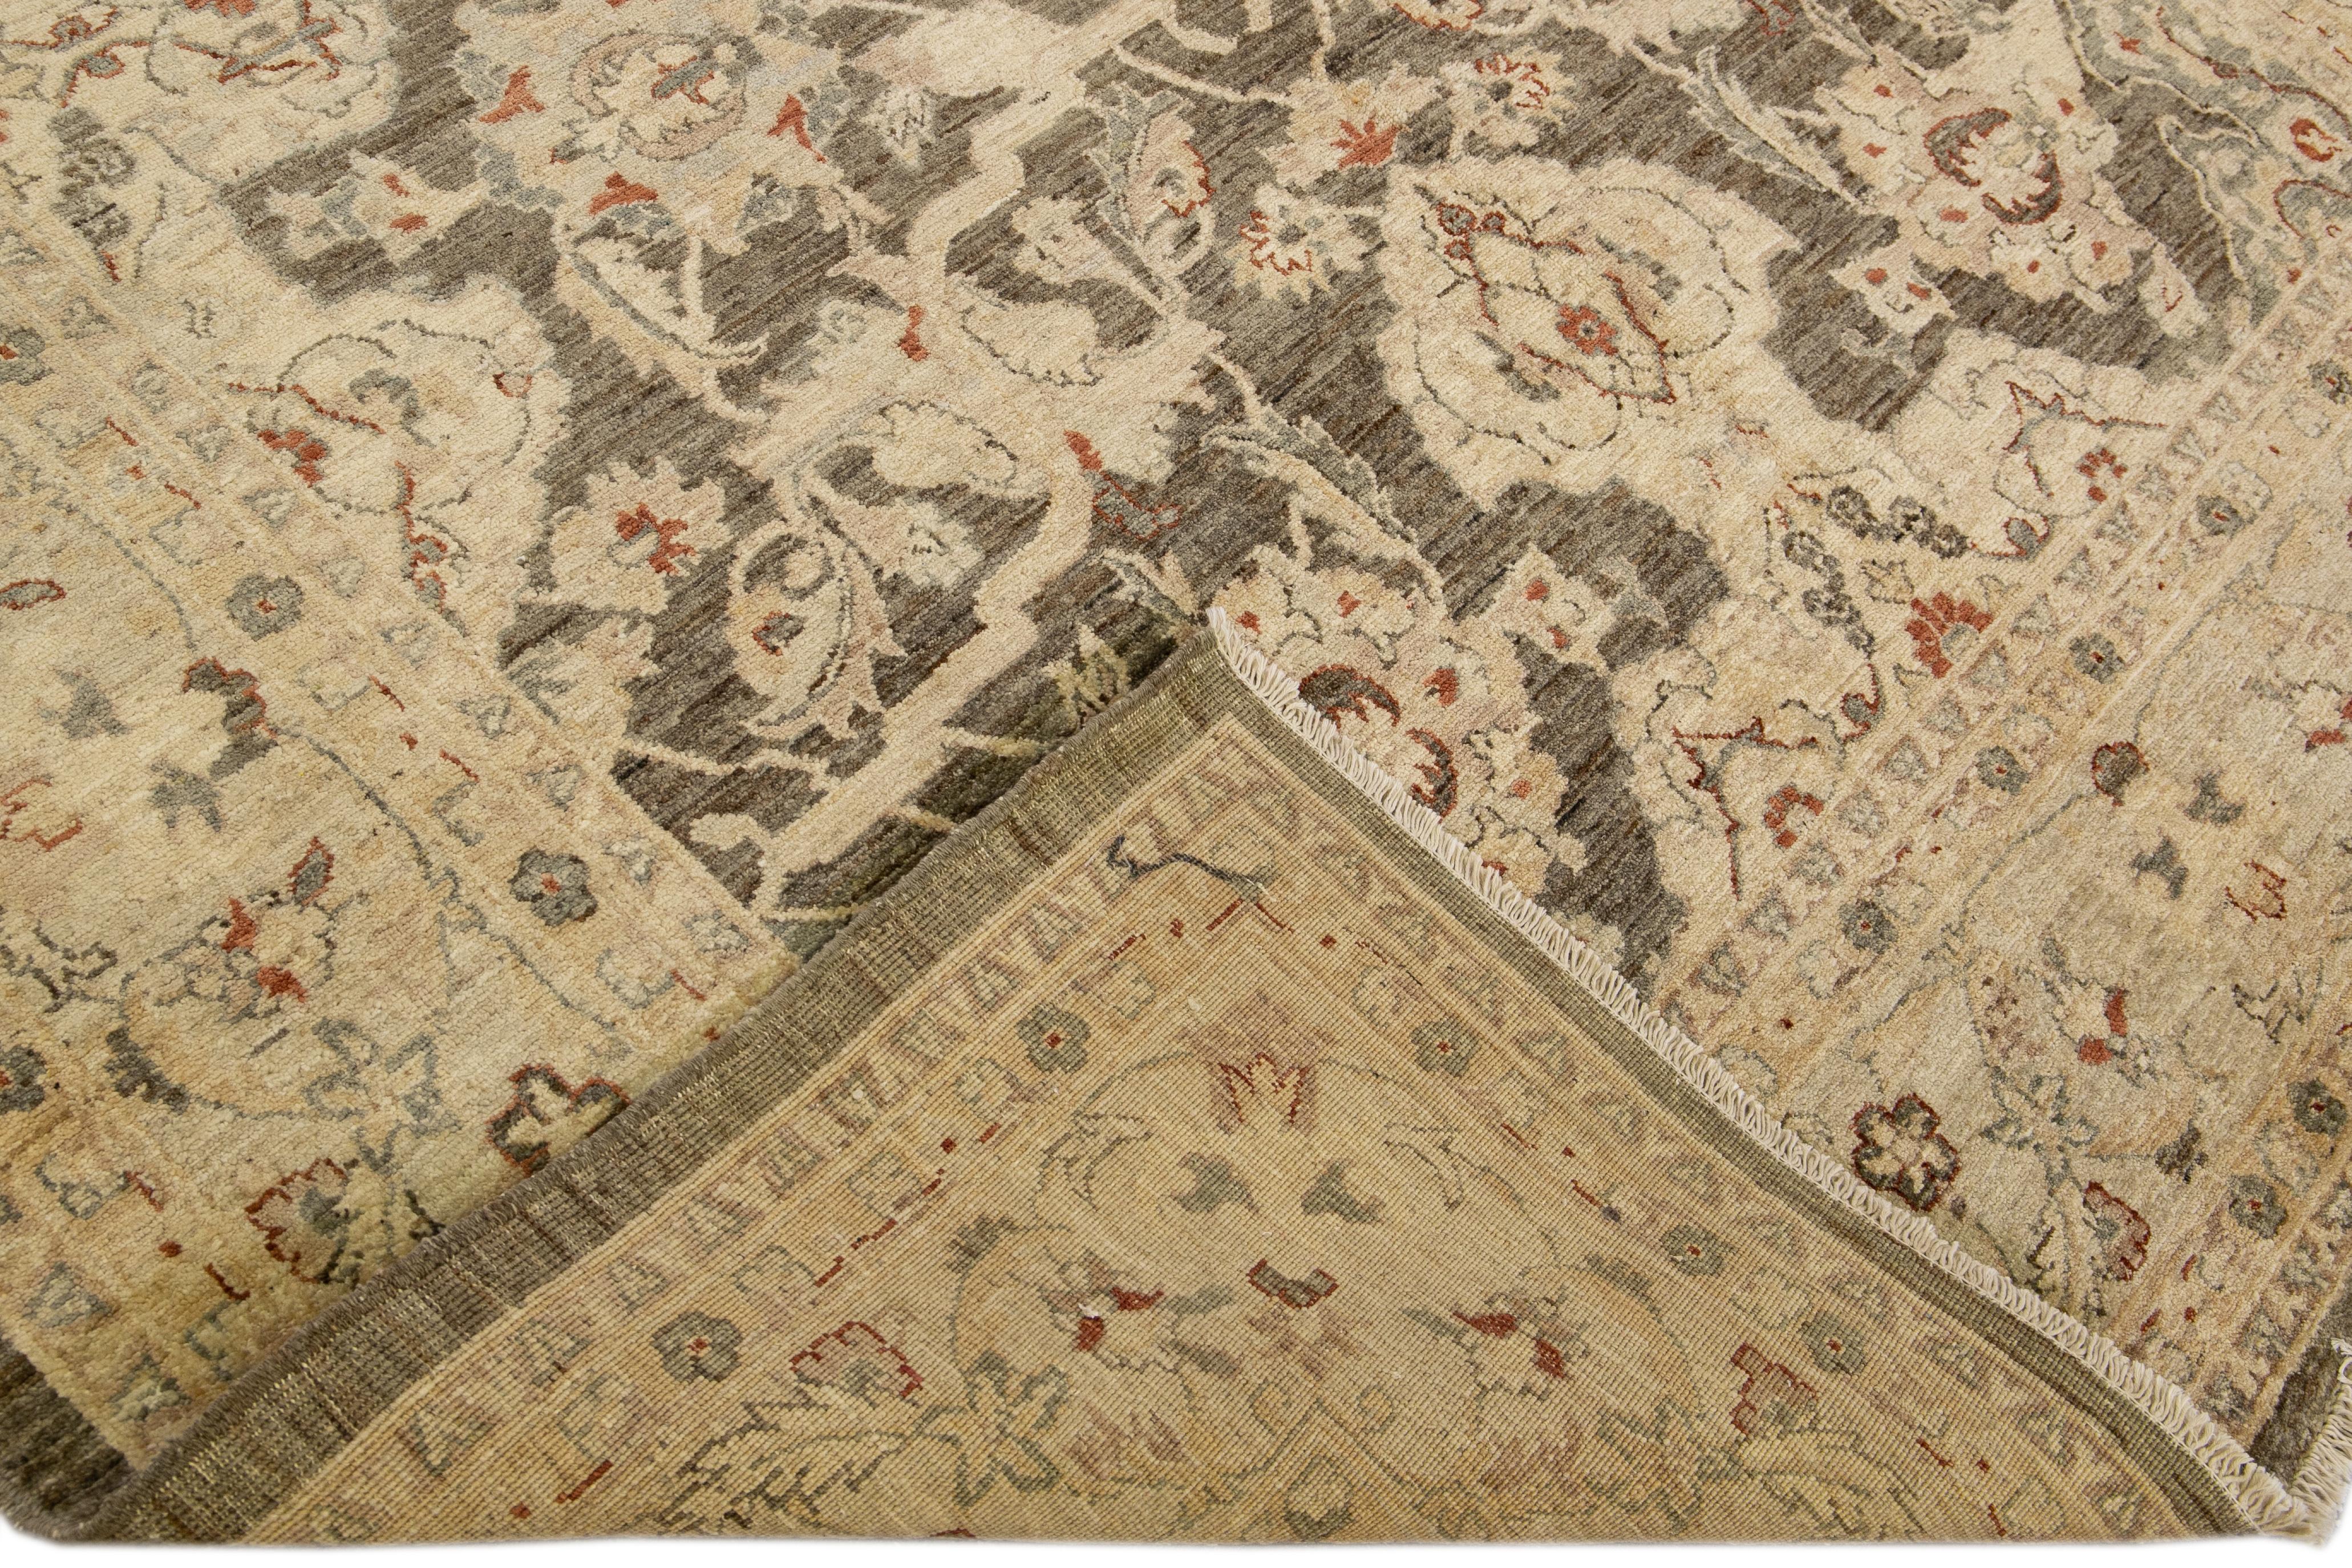 Beautiful oversize Paki Peshawar hand-knotted wool rug with a beige field. This modern rug has gray and tan accents in a gorgeous all-over Classic vine scroll and a palmettes motif.

This rug measures: 8' x 9'8